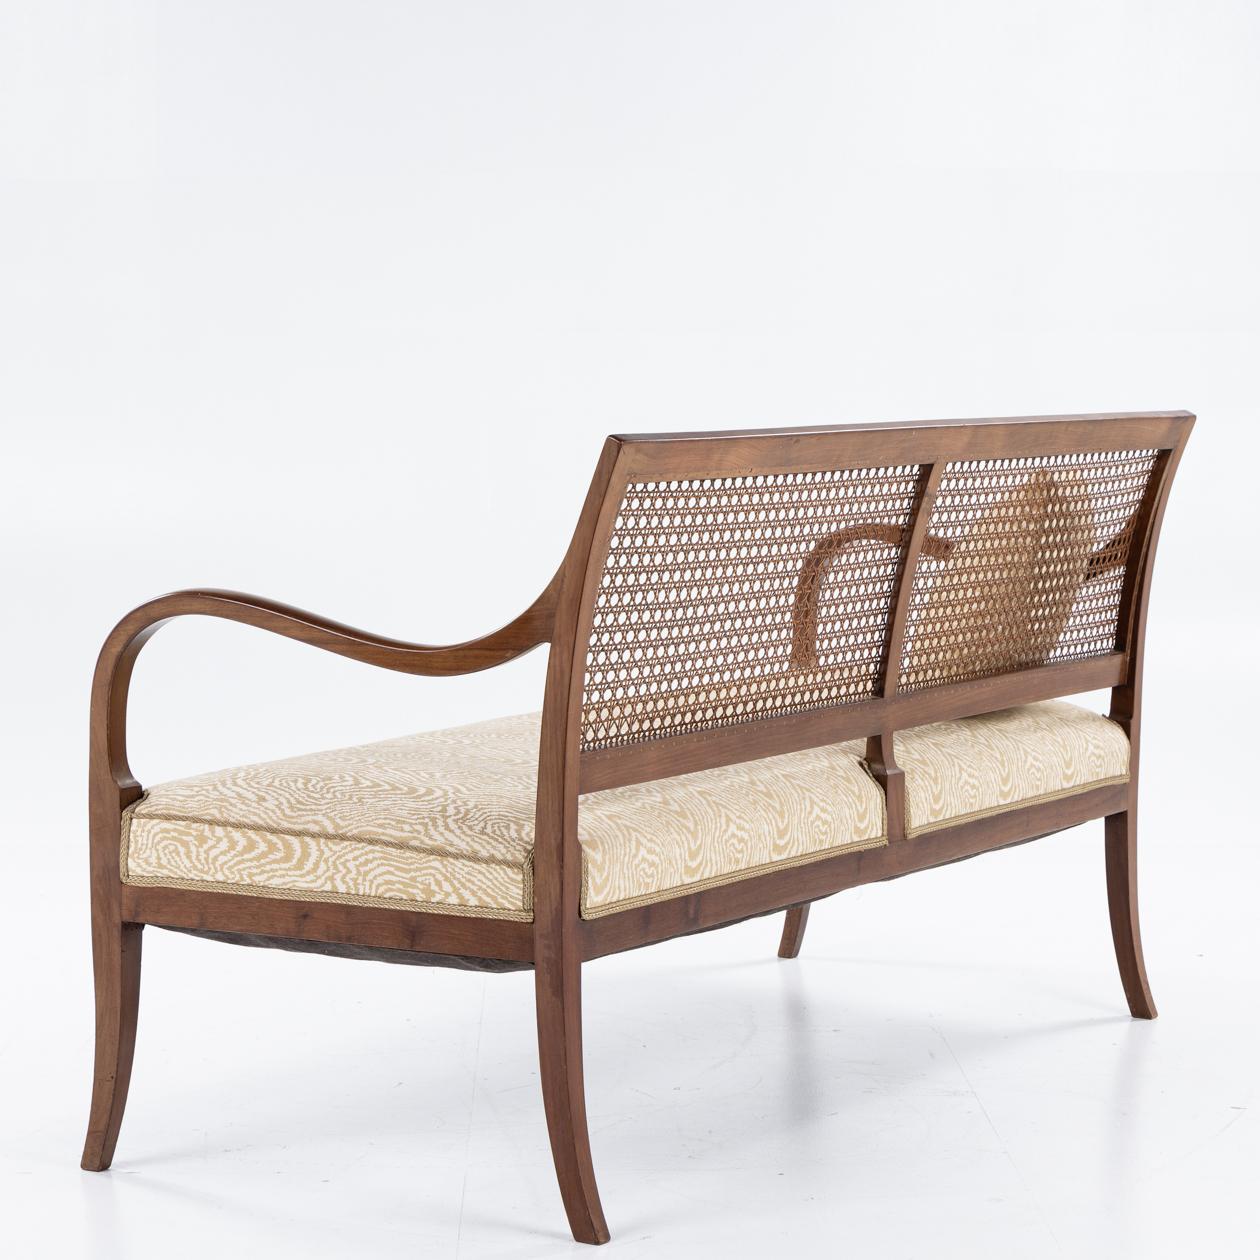 Sofa with curved arms in mahogany, french cane and wool. By Frits Henningsen.